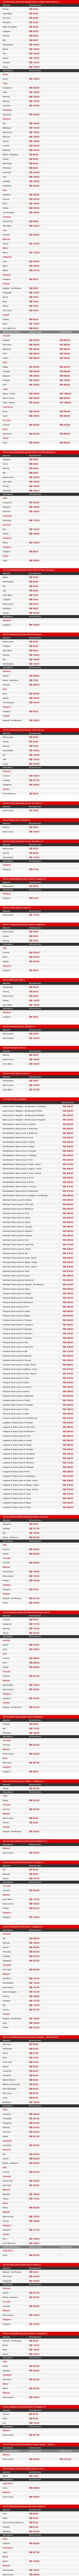 AirAsia Buy Now Fly Now Fares Details